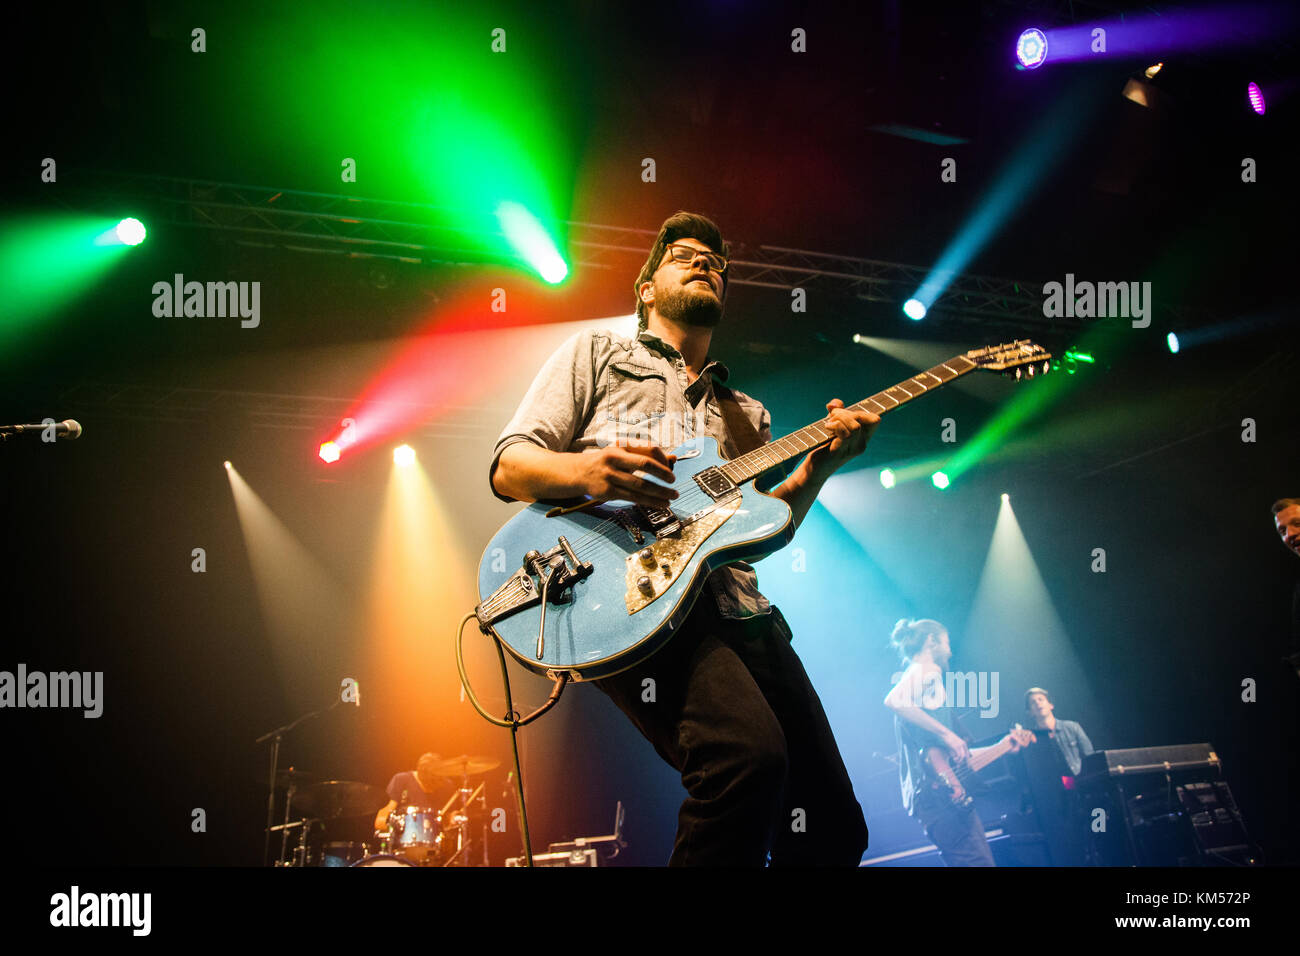 The German singer-songwriter and musician Joris Buchholz is best known just as Joris and here performs a live concert at the German music festival Traumzeit Festival 2015 in Duisburg. Here live band memner Wolfgang Morenz on guitar is pictired live on stage. Germany, 20/06 2015. Stock Photo